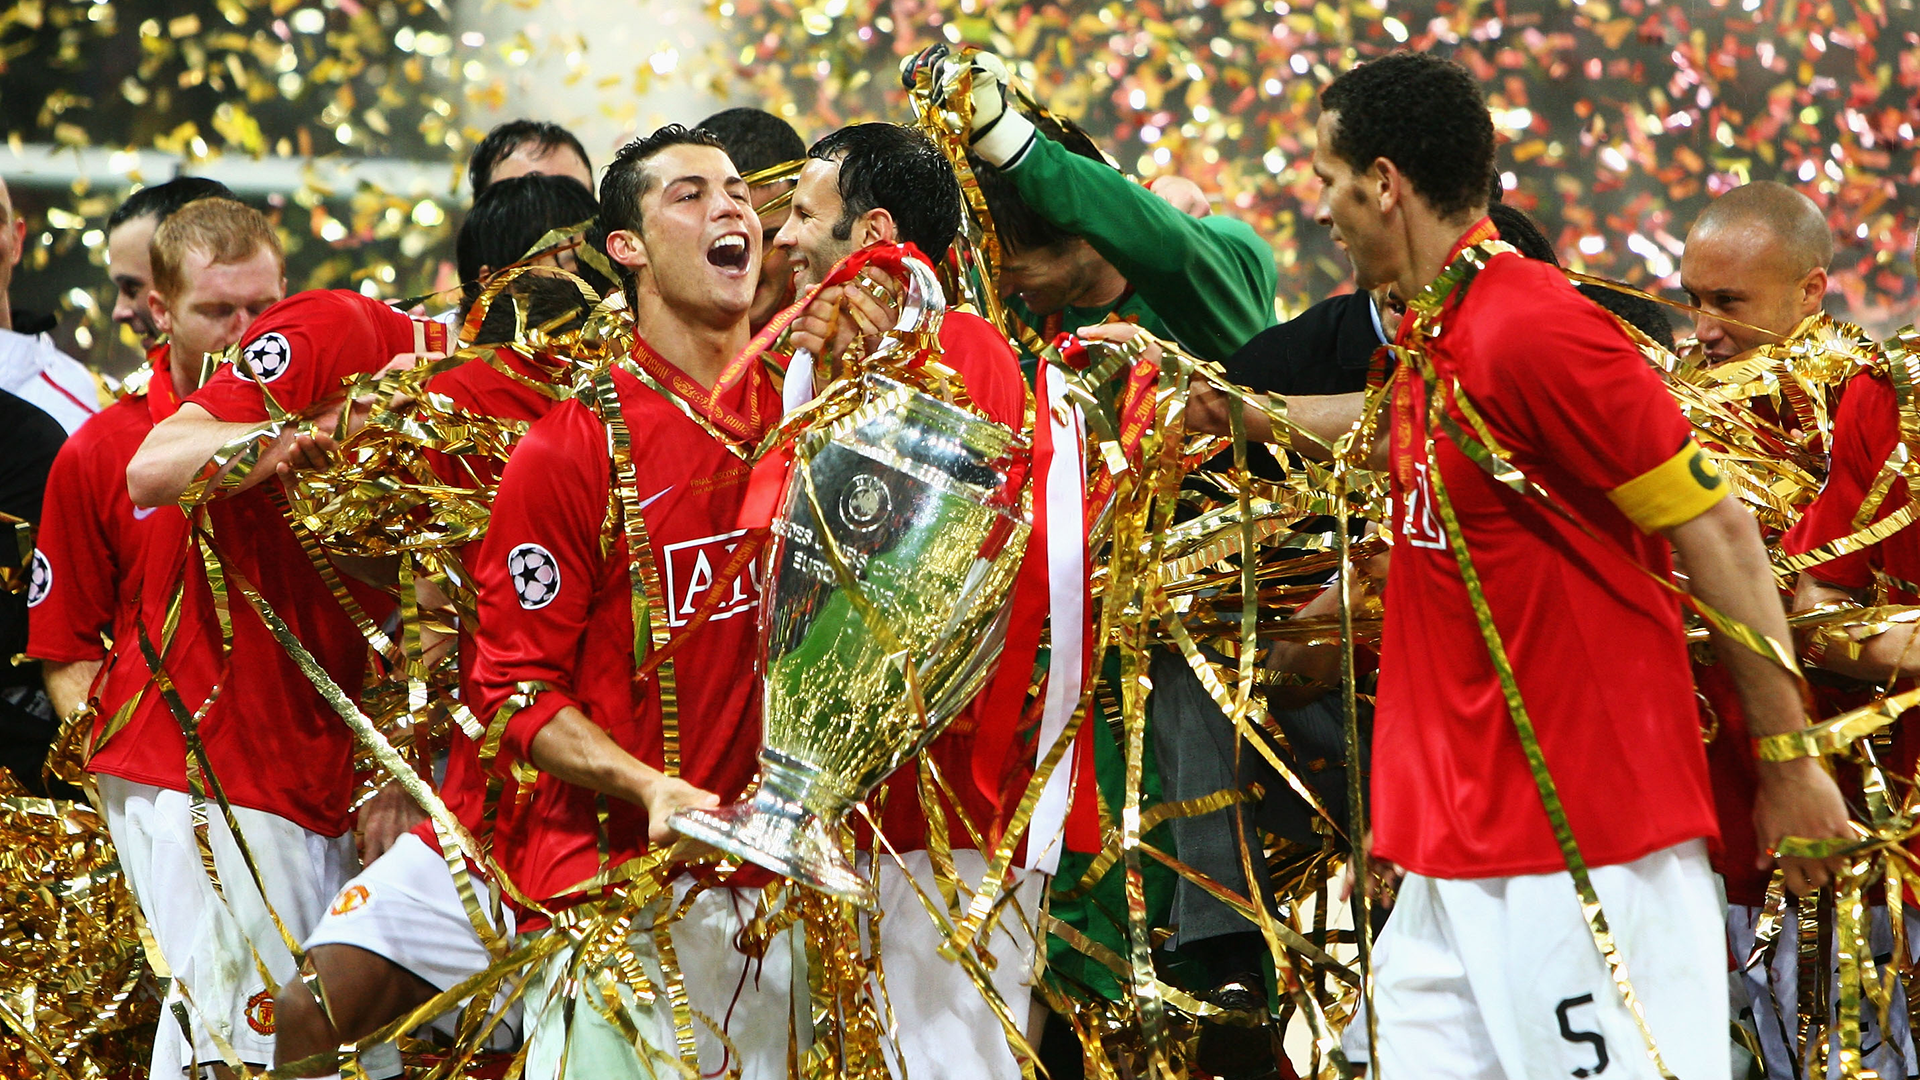 Manchester United's history in the Champions League Titles, finals